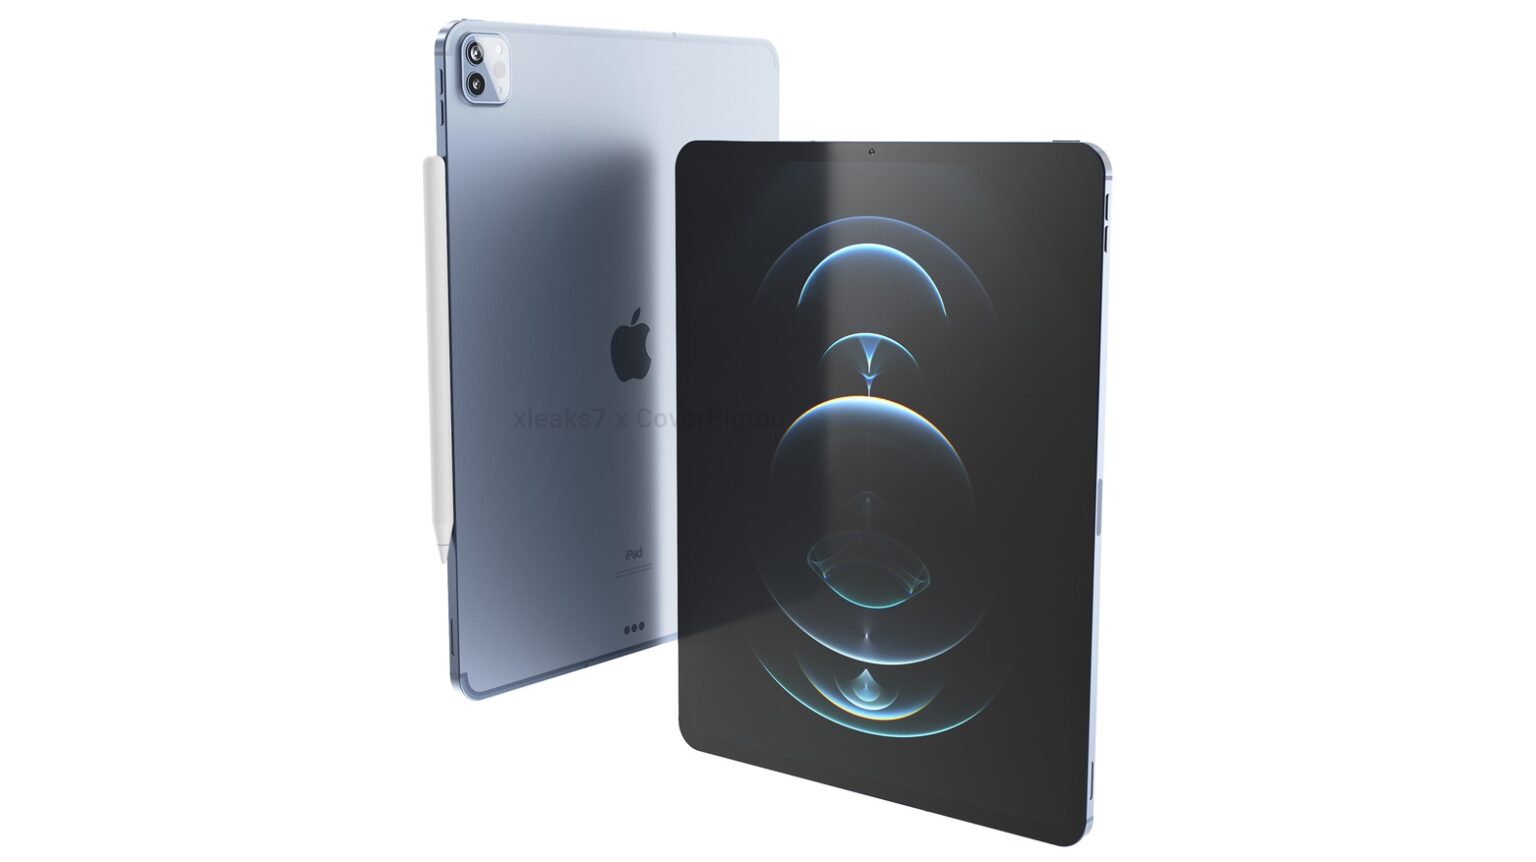 This might be the 2021 iPad Pro.